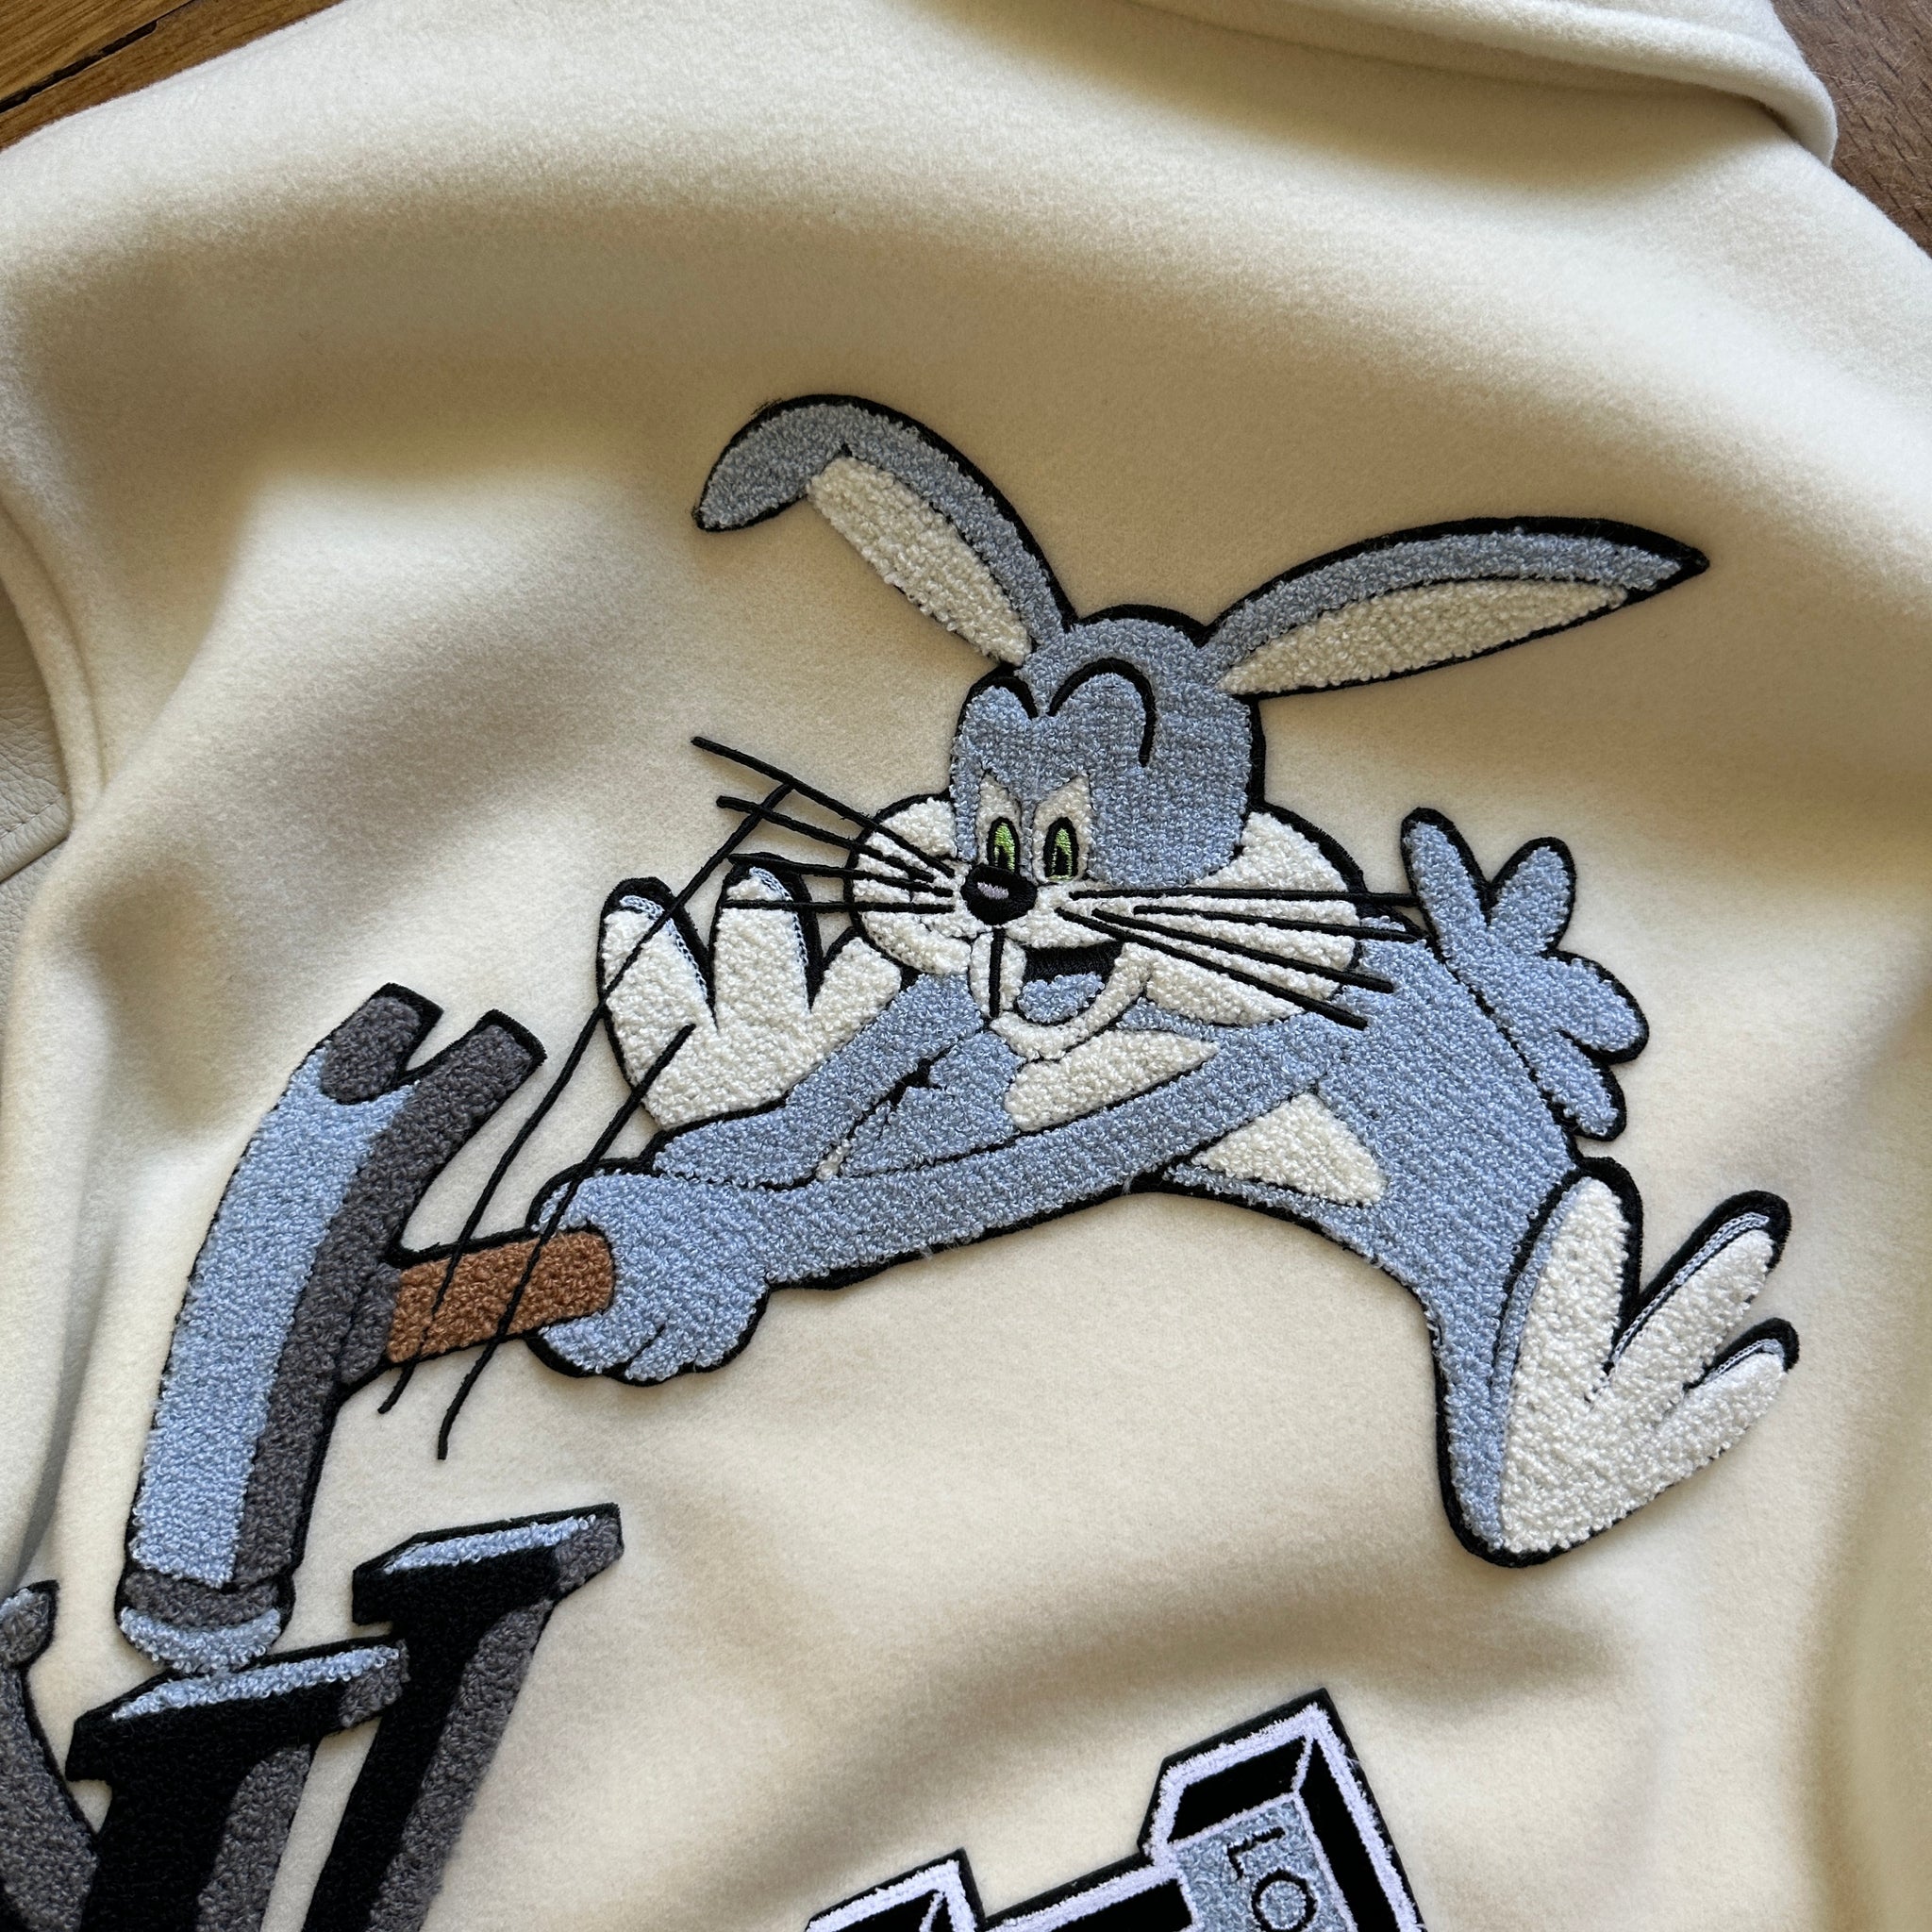 Full-Snap Wool and Leather Cream Louis Vuitton Bunny Varsity